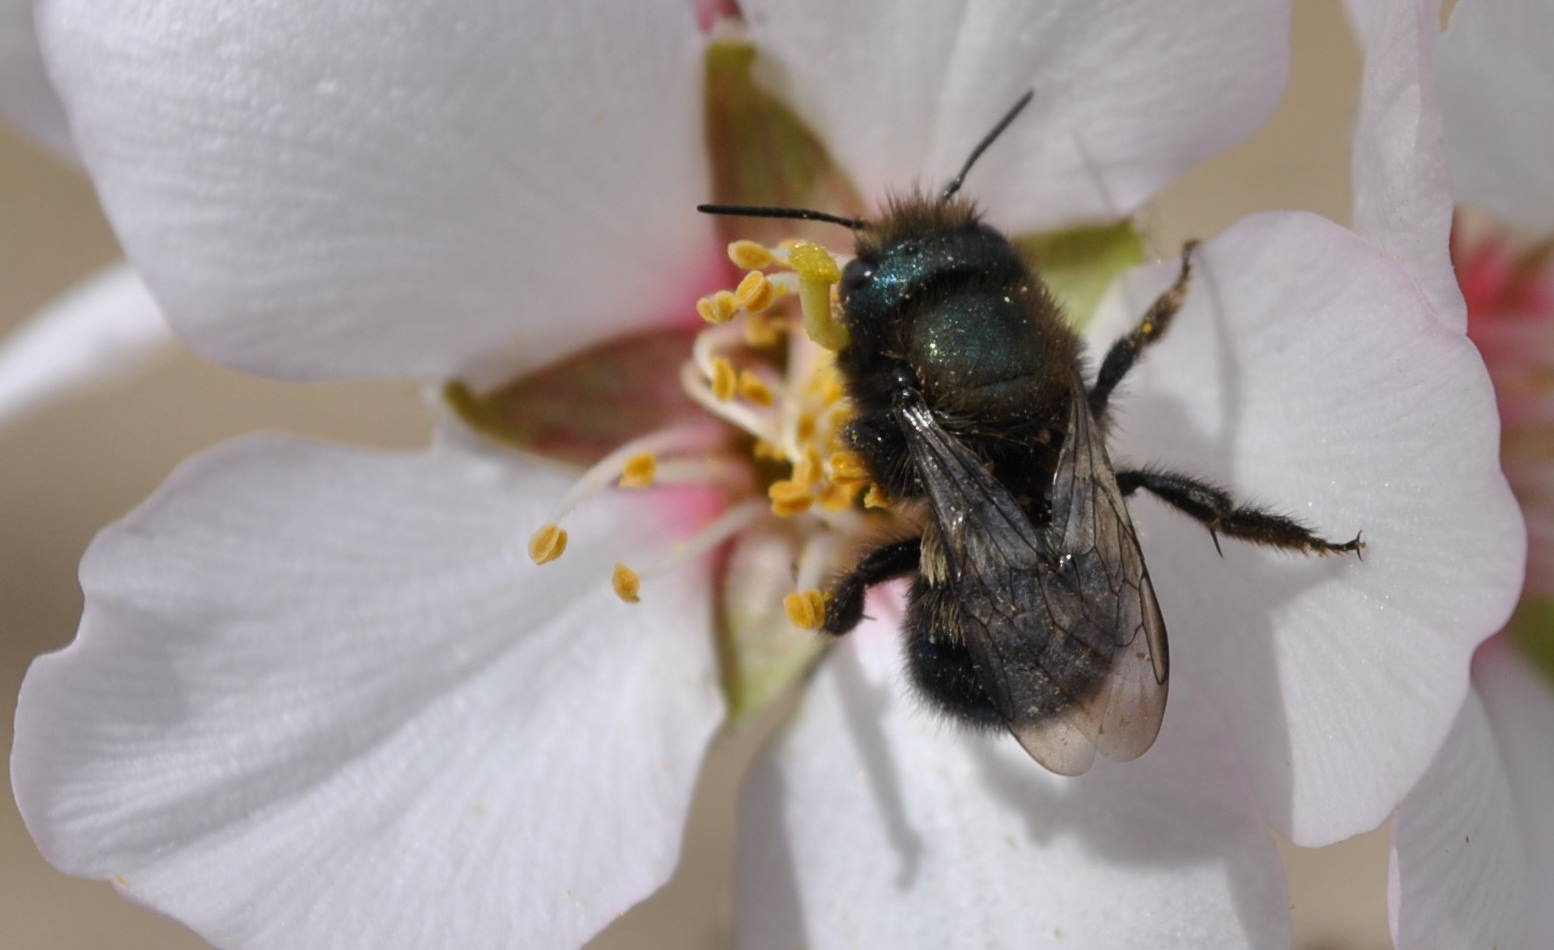 A blue orchard bee on a flower.